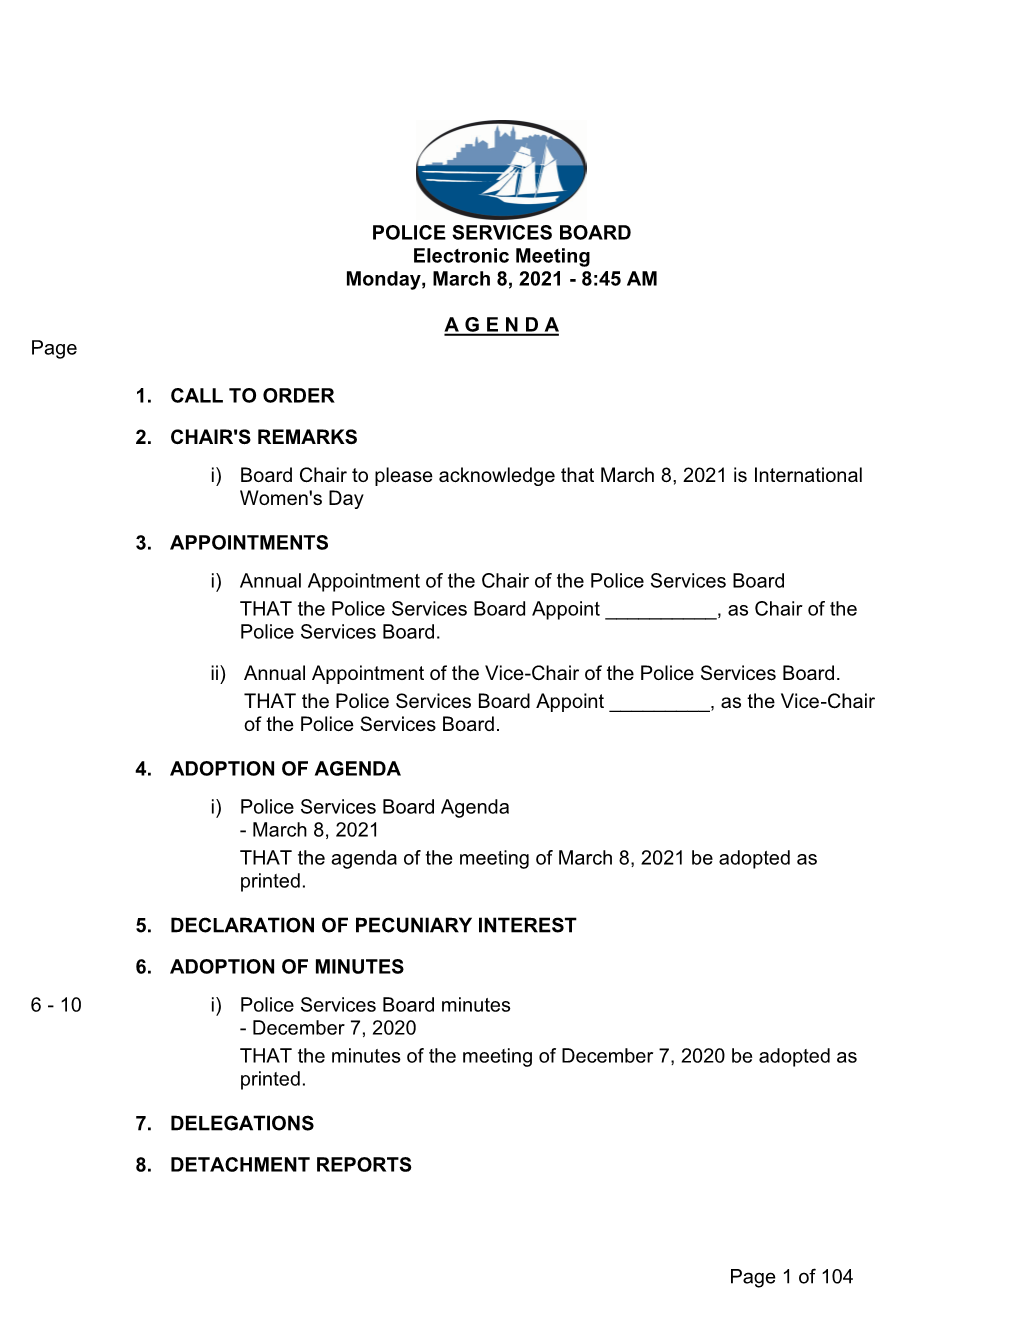 POLICE SERVICES BOARD Electronic Meeting Monday, March 8, 2021 - 8:45 AM